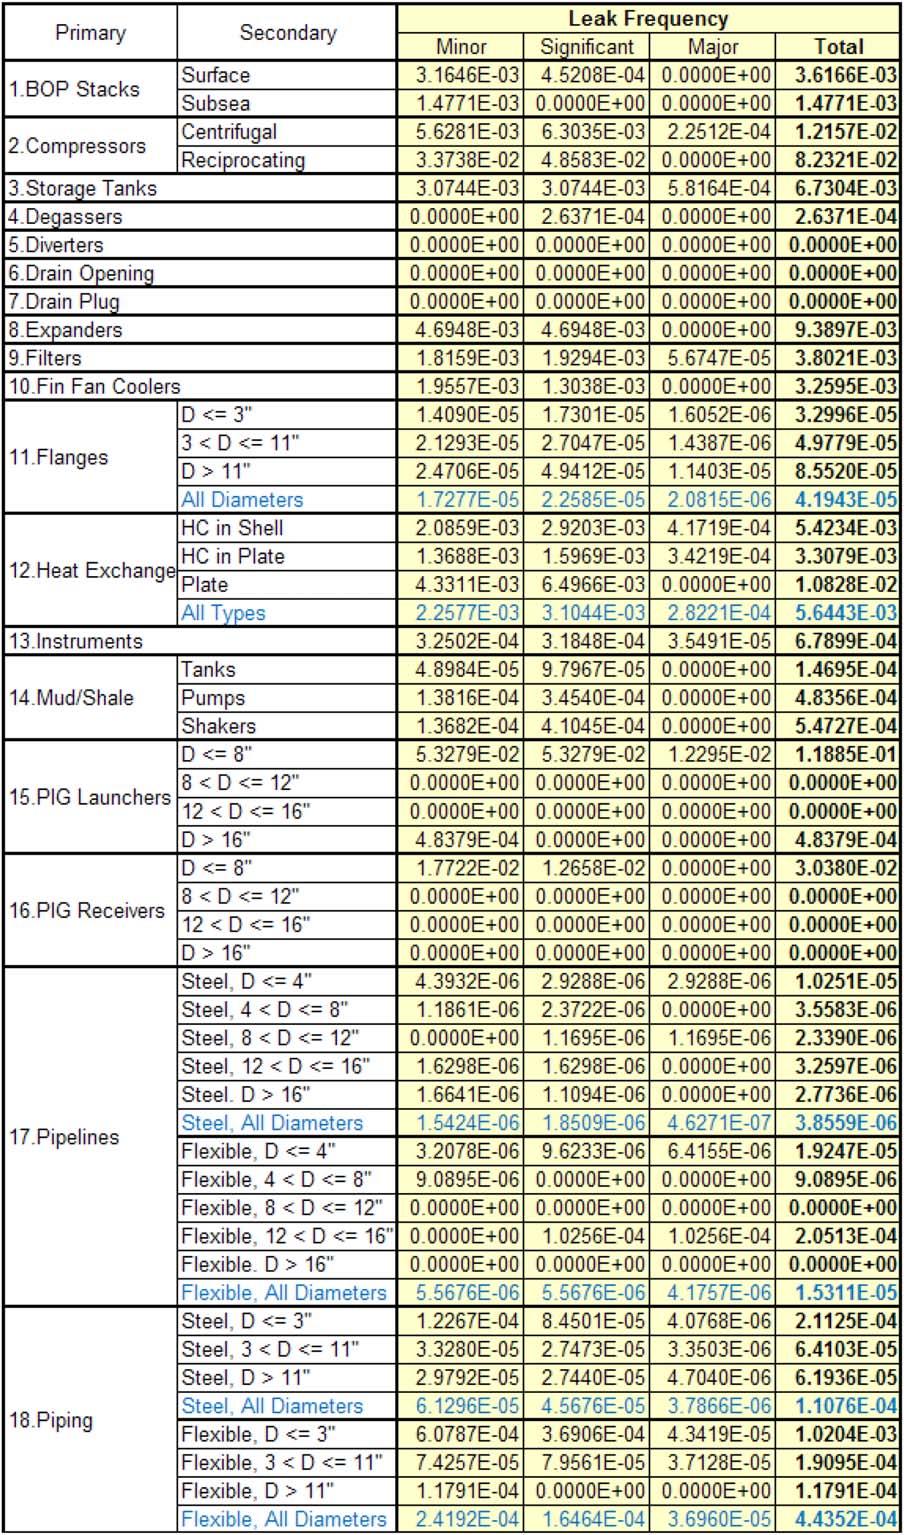 Figure 2. Annual leak frequencies for equipment categories. [Color figure can be viewed in the online issue, which is available at wileyonlinelibrary.com.